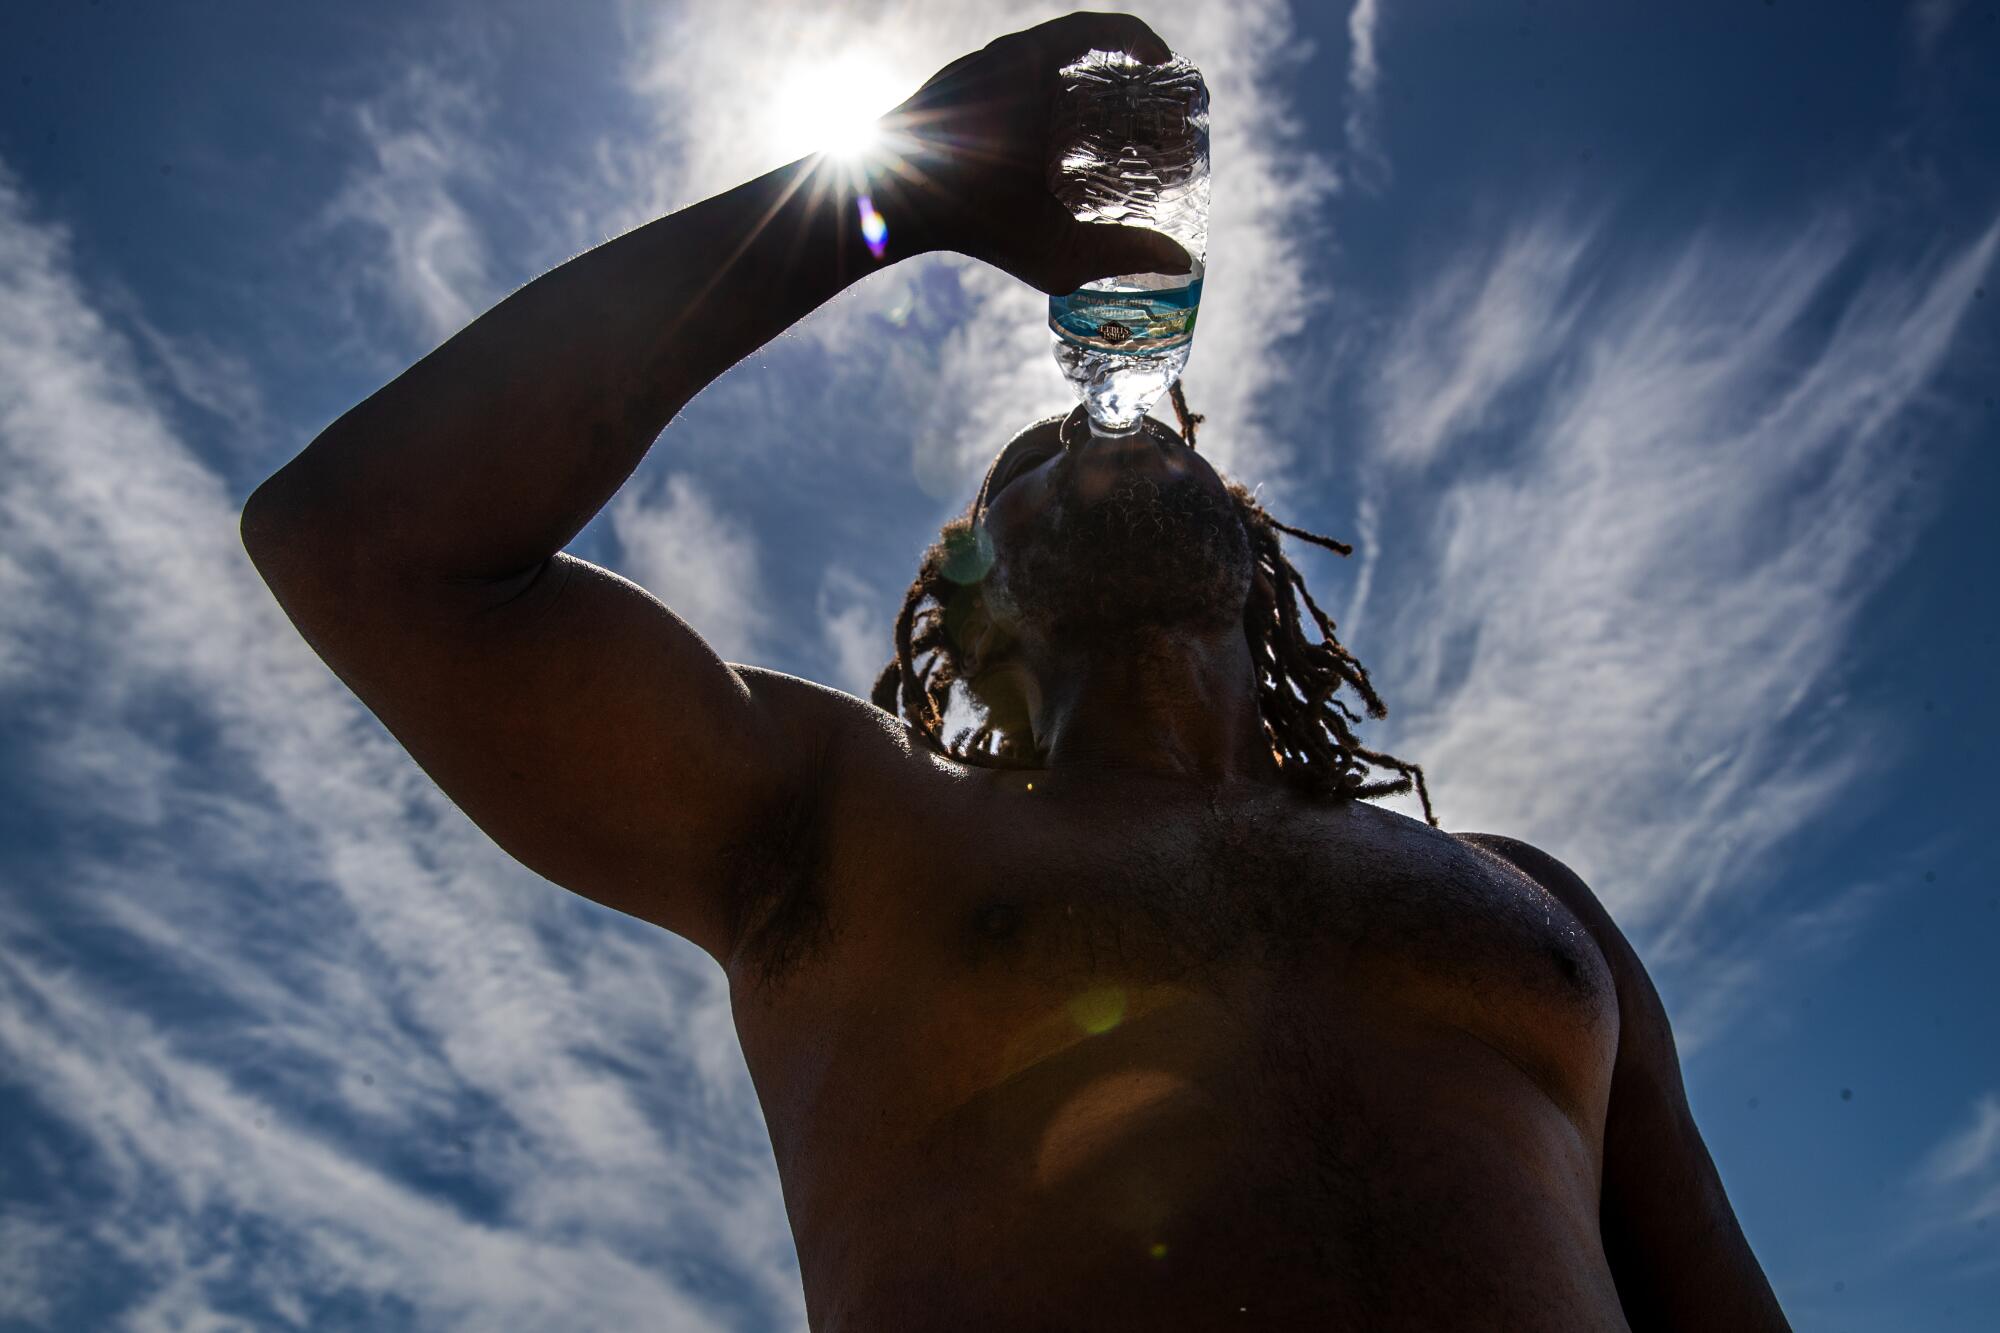 A dreadlocked man is silhouetted against the blistering sun as he gulps down a third bottle of water in Blythe.